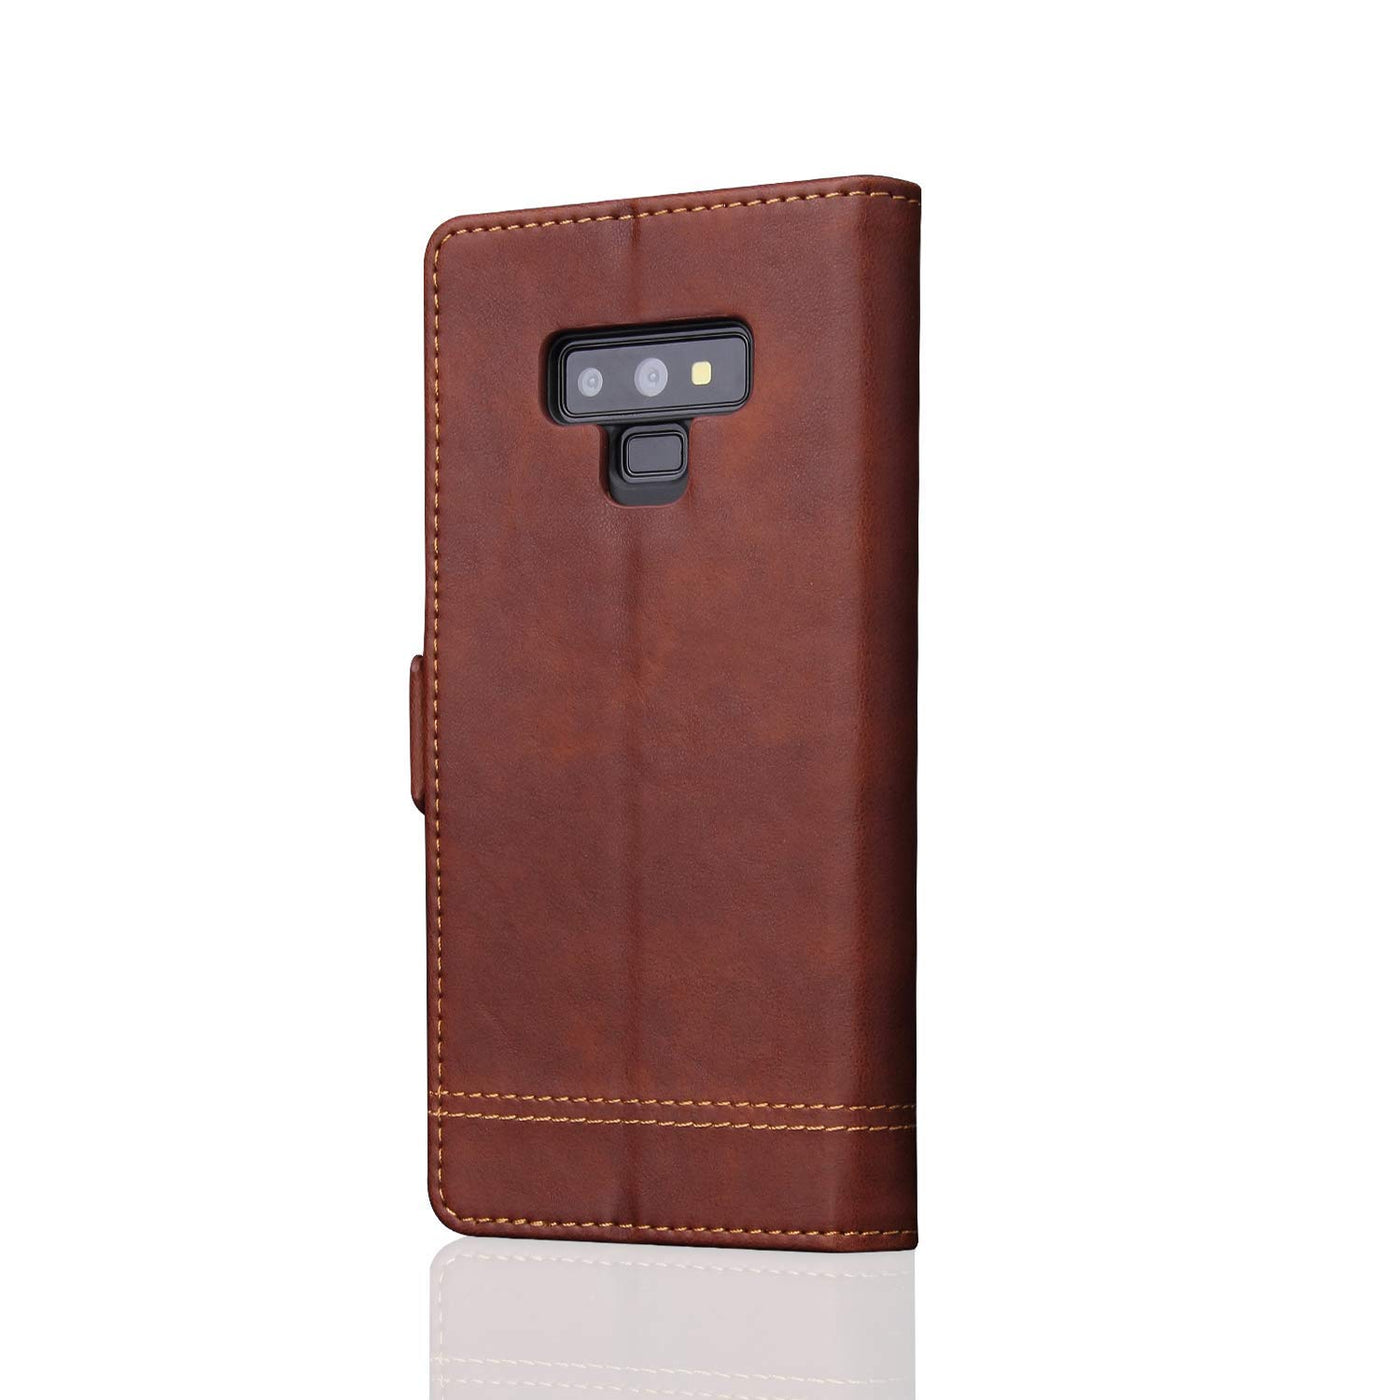 Samsung Galaxy Note 9 leather case cover with camera protection